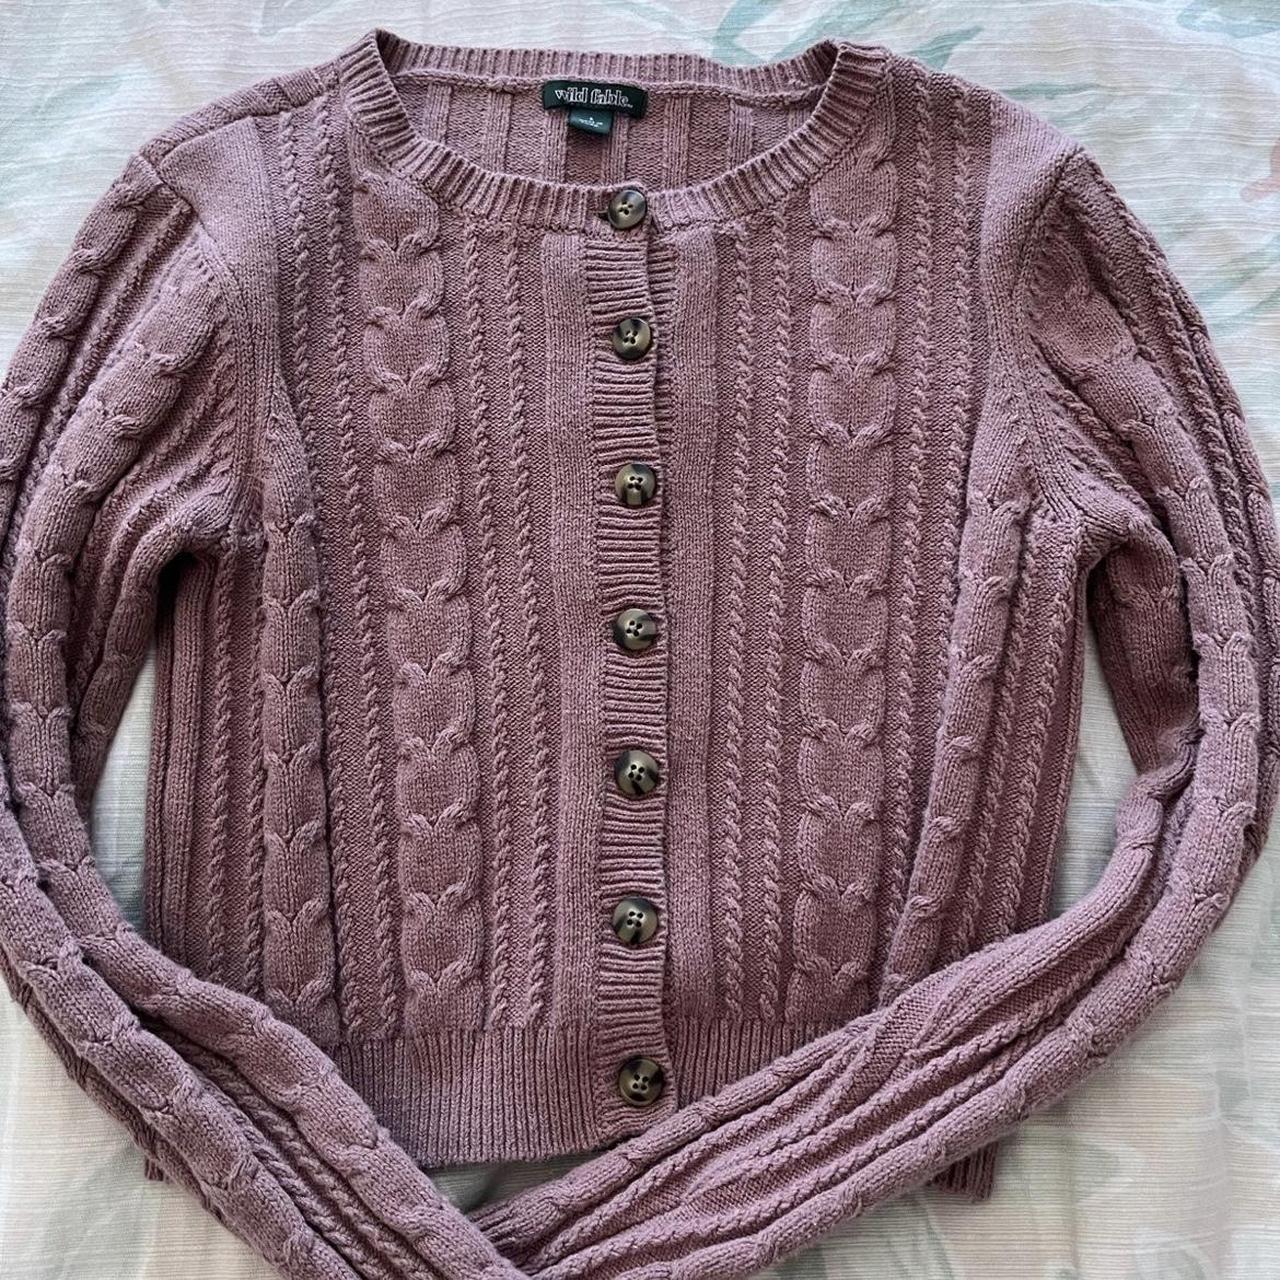 wild fable sweater -pink color -wild fable - Depop